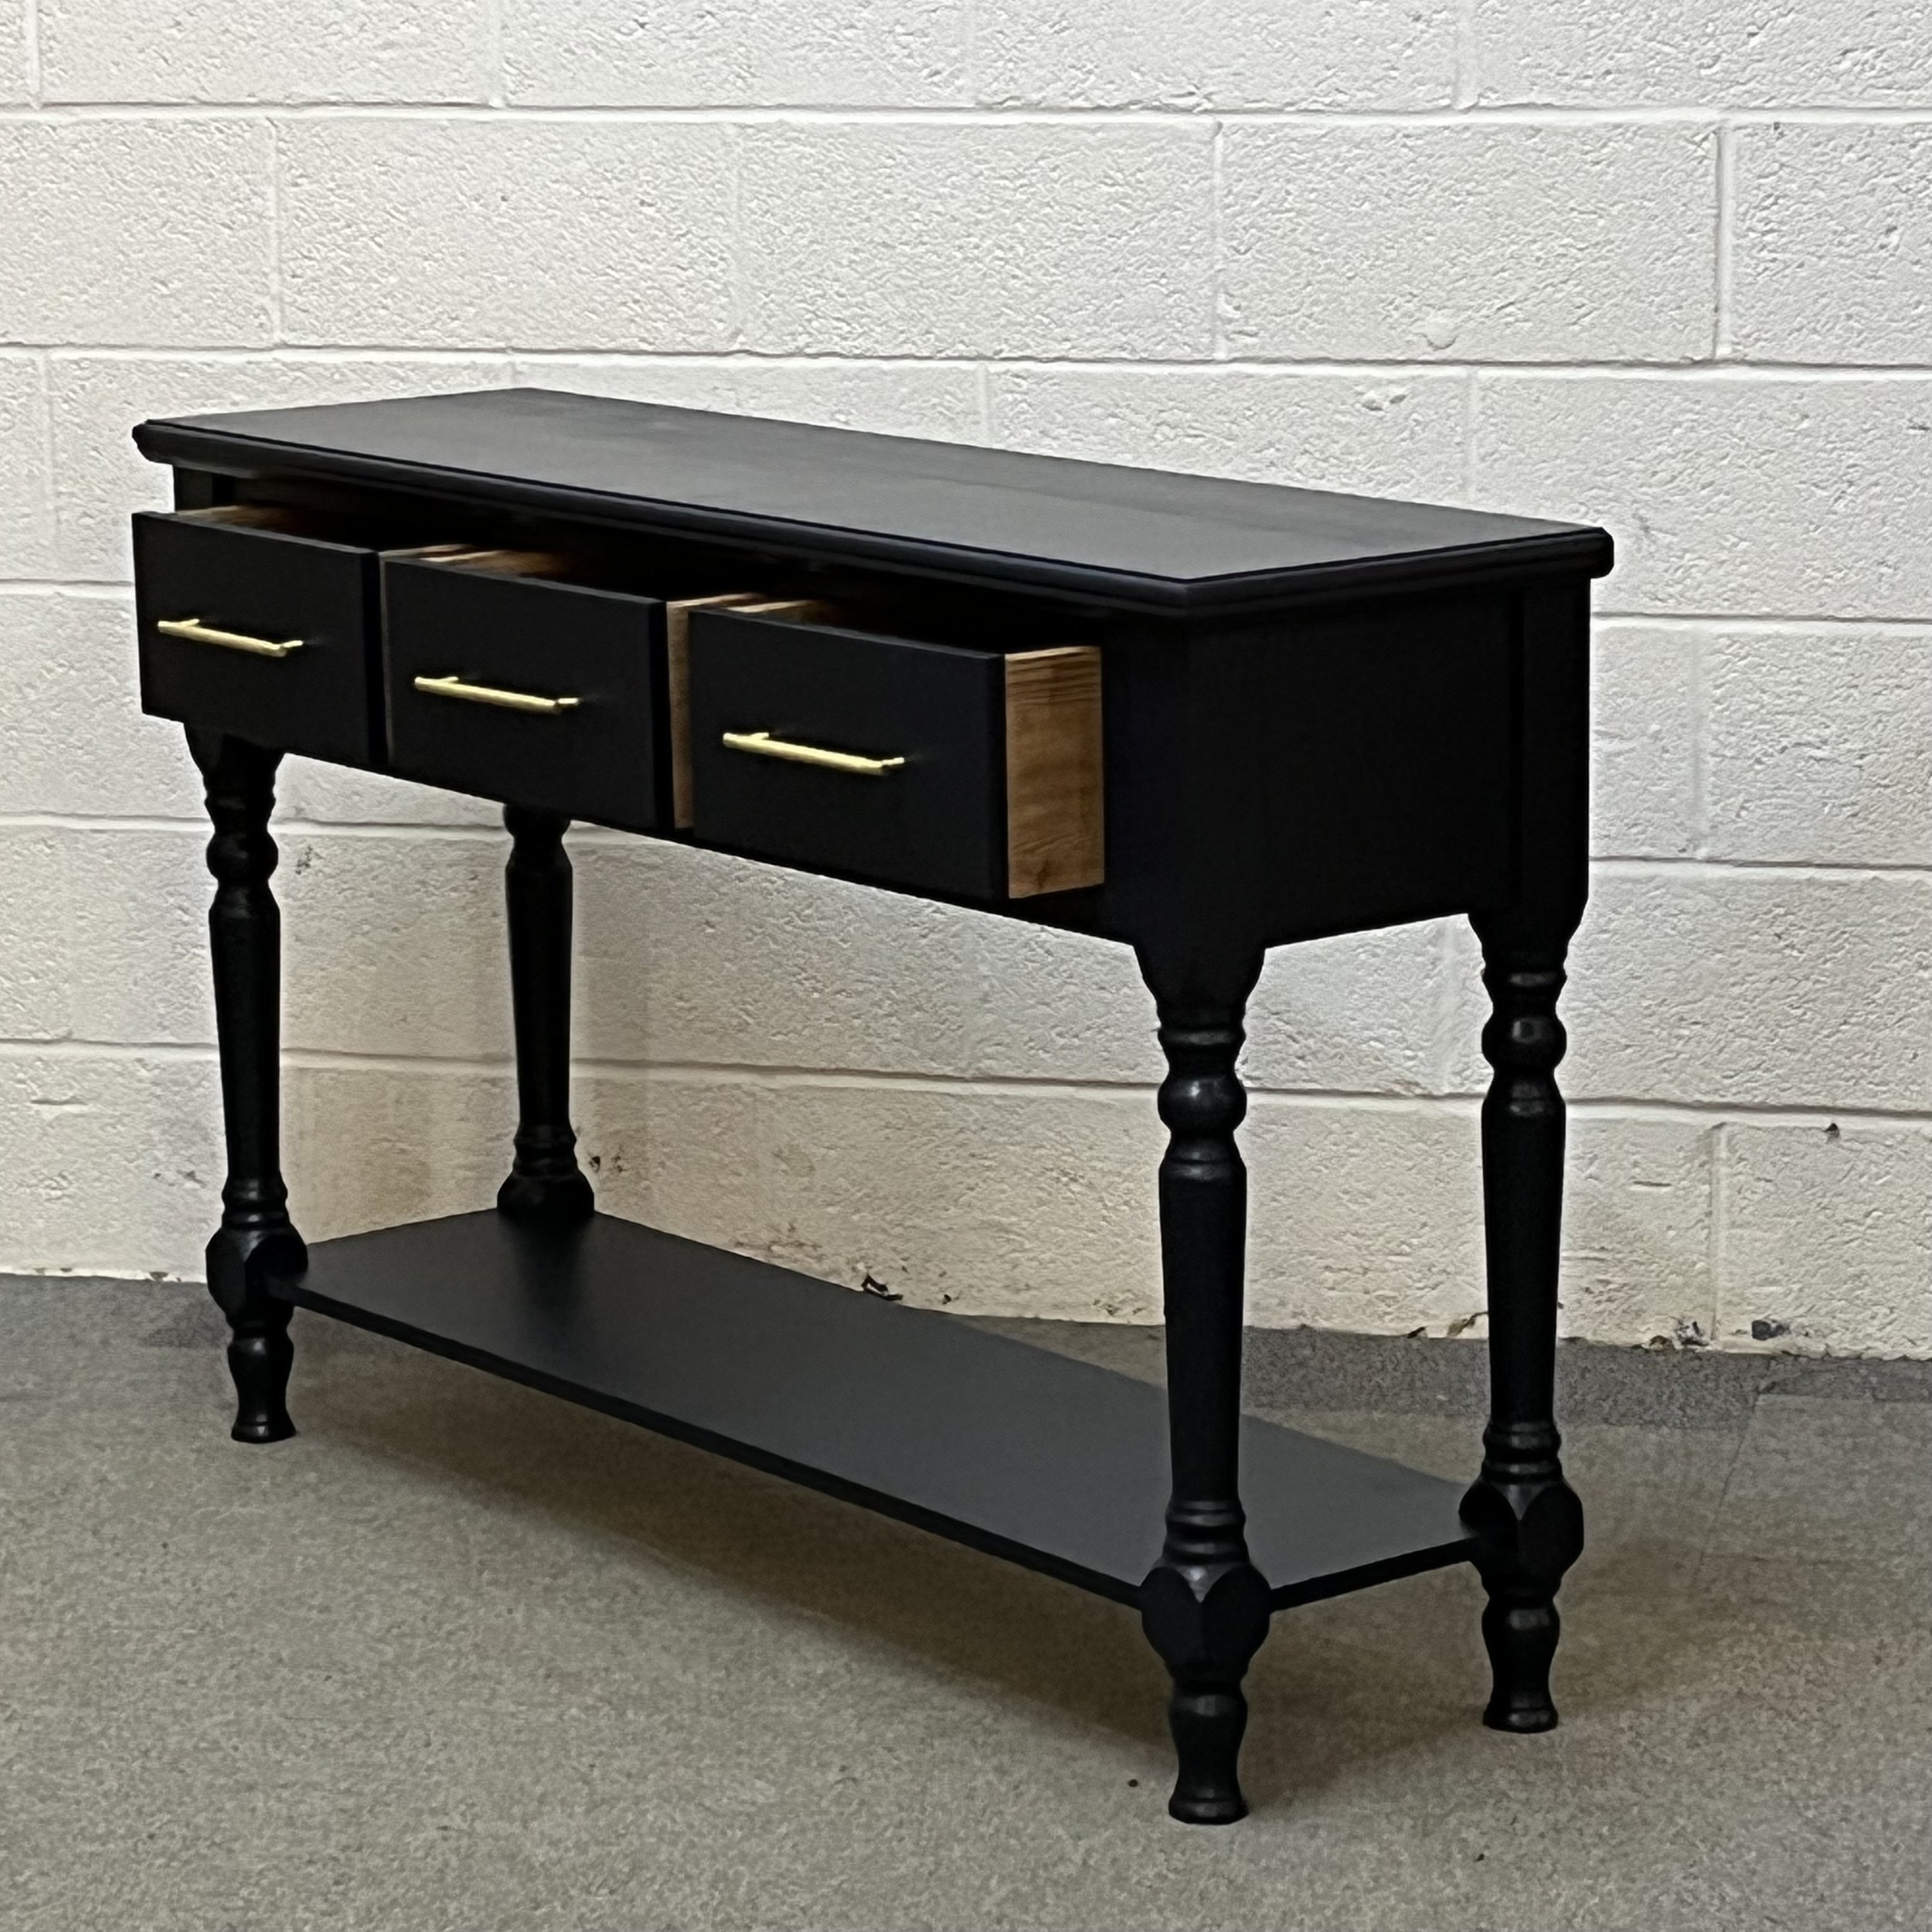 Painted Console Table with 3 drawers